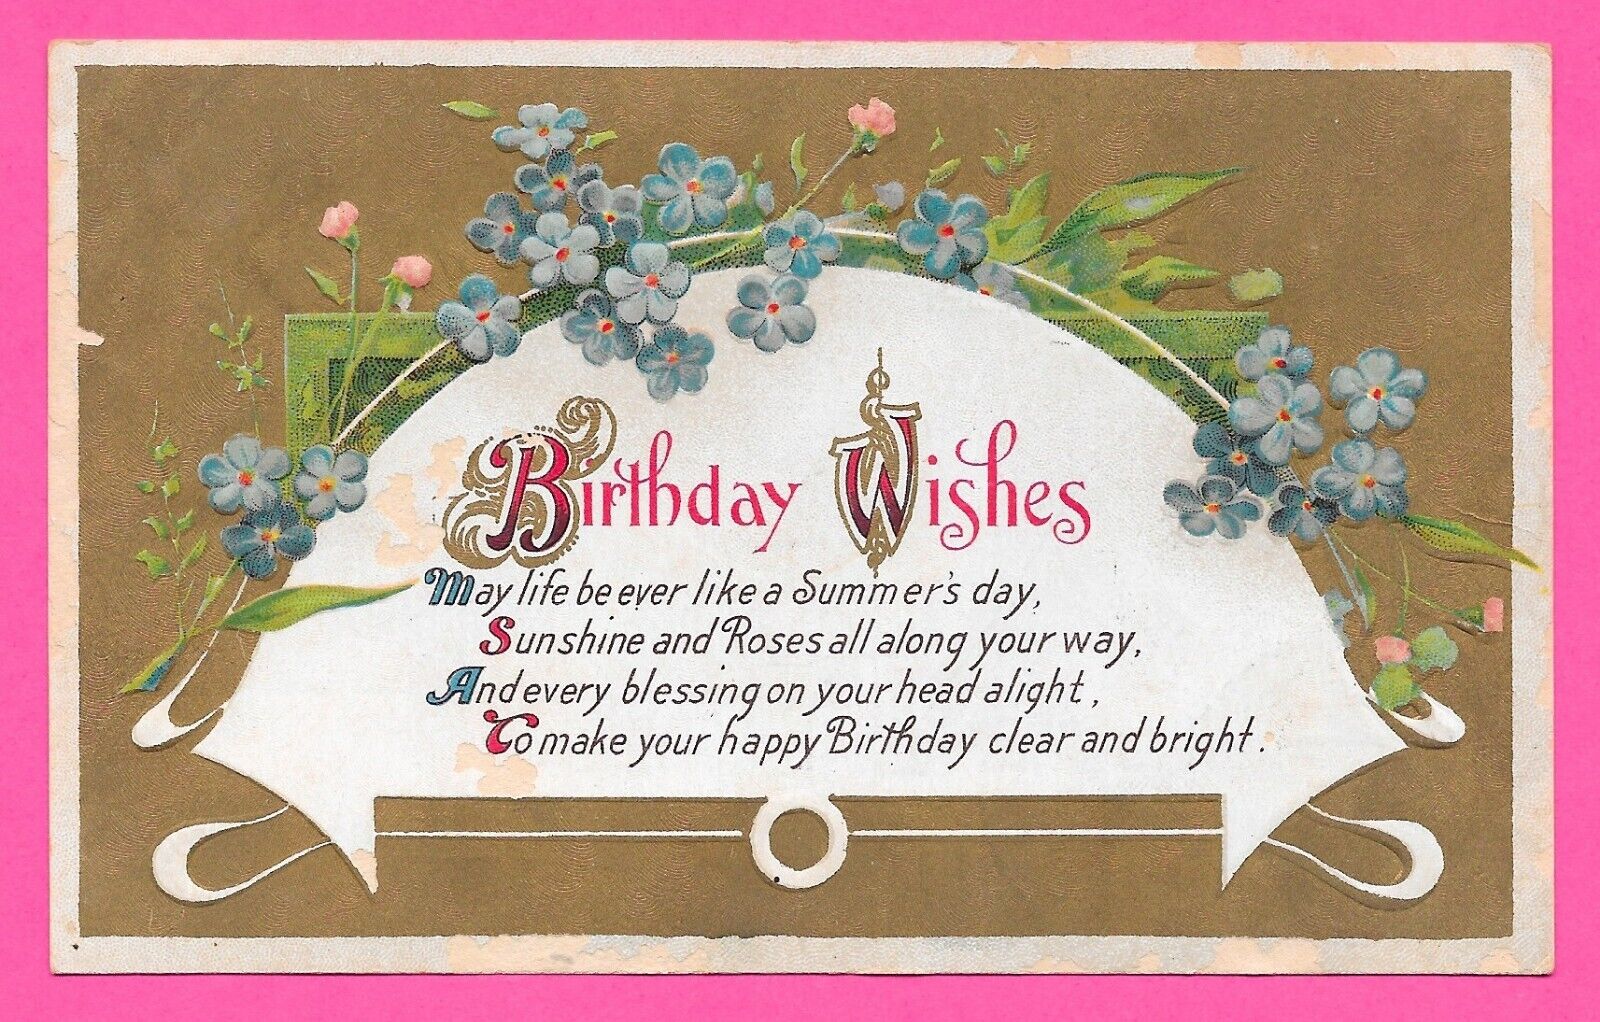 Birthday Wishes - Posted early 1900s Central SC - Post Card